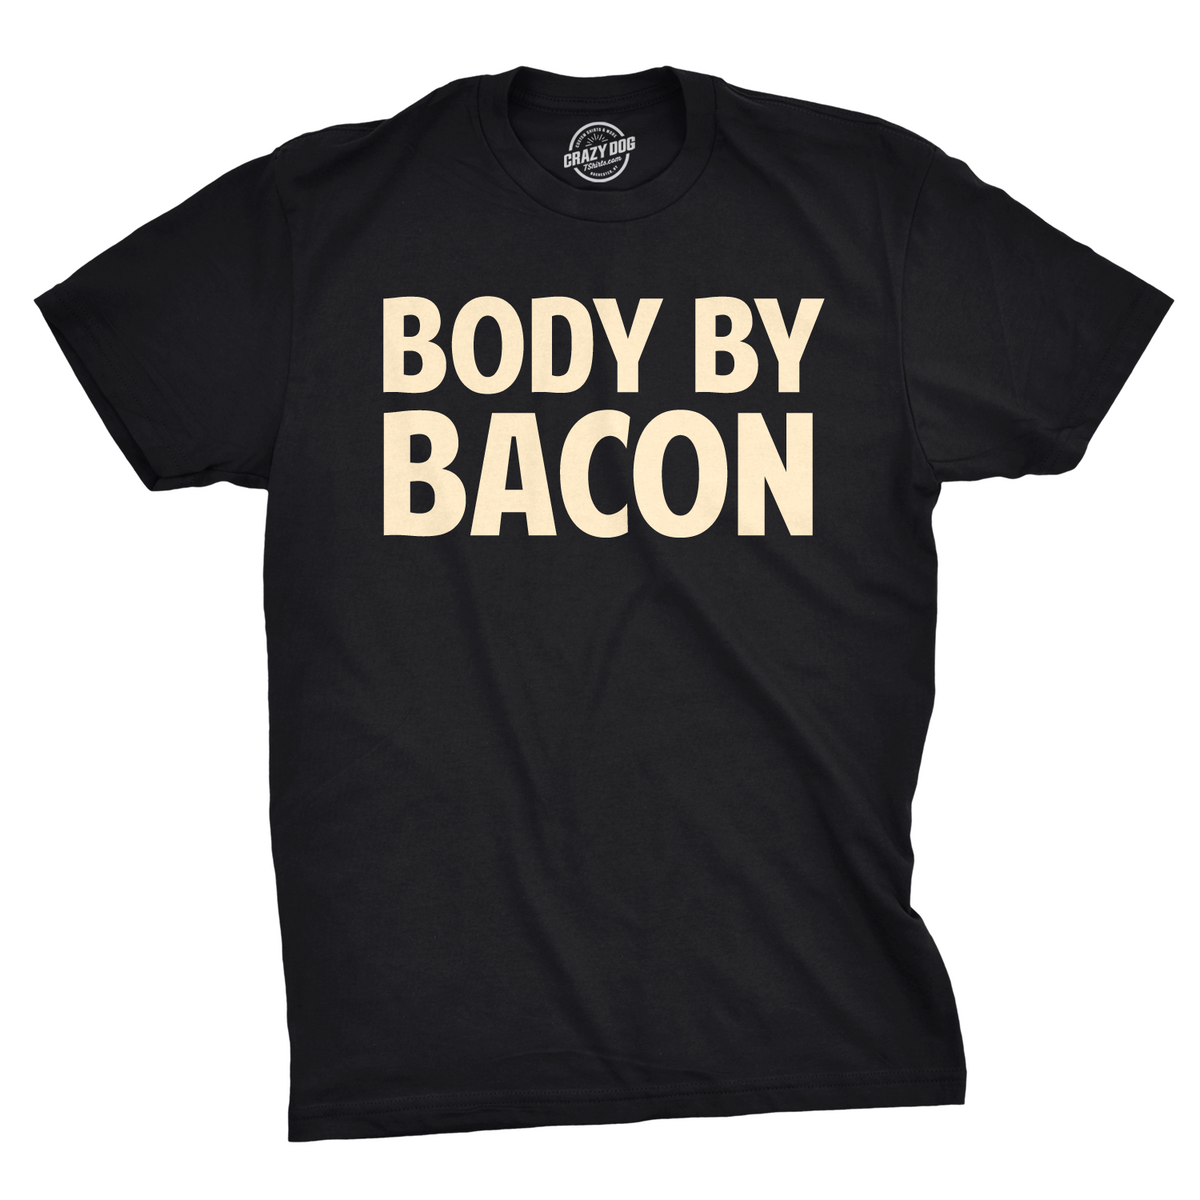 Funny Black Body By Bacon Mens T Shirt Nerdy Fitness Food Tee